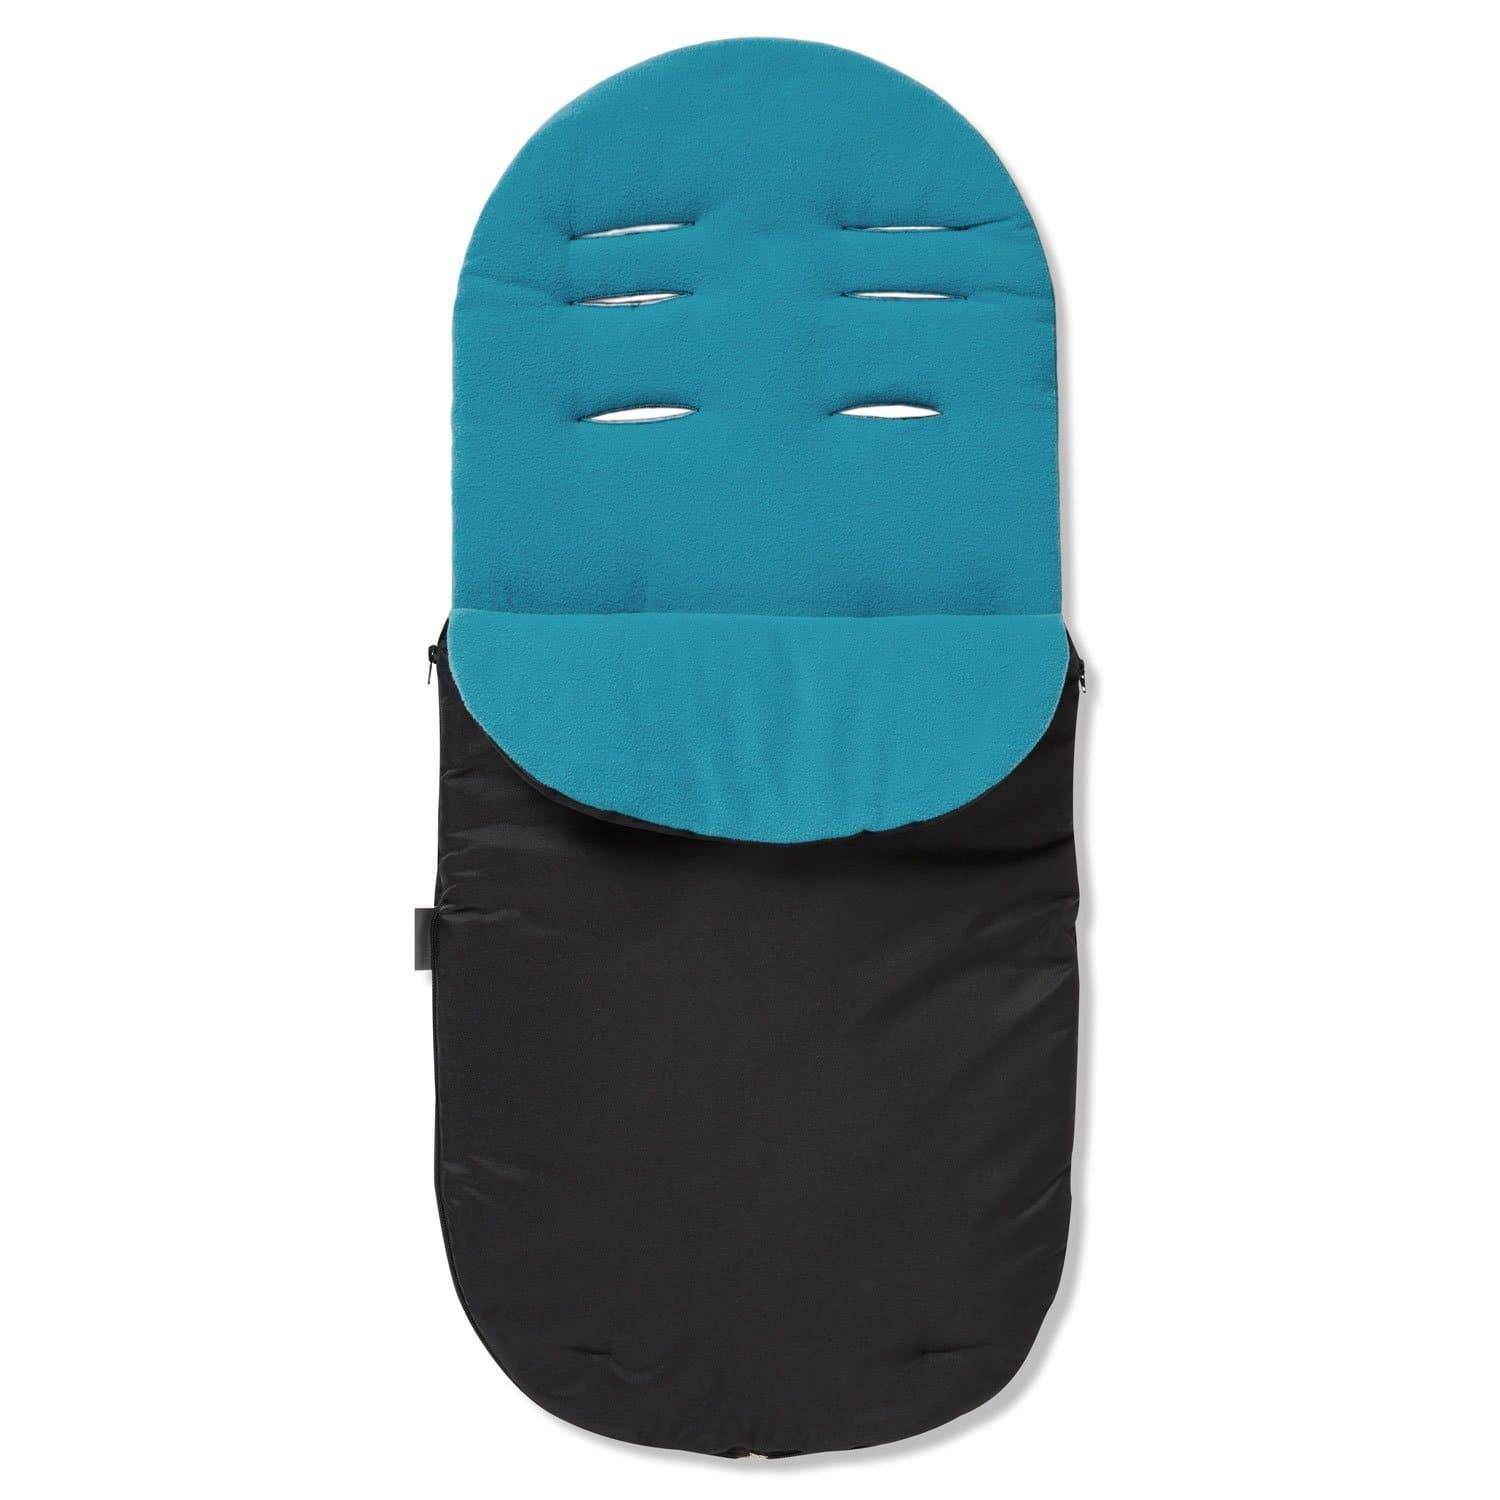 Footmuff / Cosy Toes Compatible with Stokke - Turquoise / Fits All Models | For Your Little One